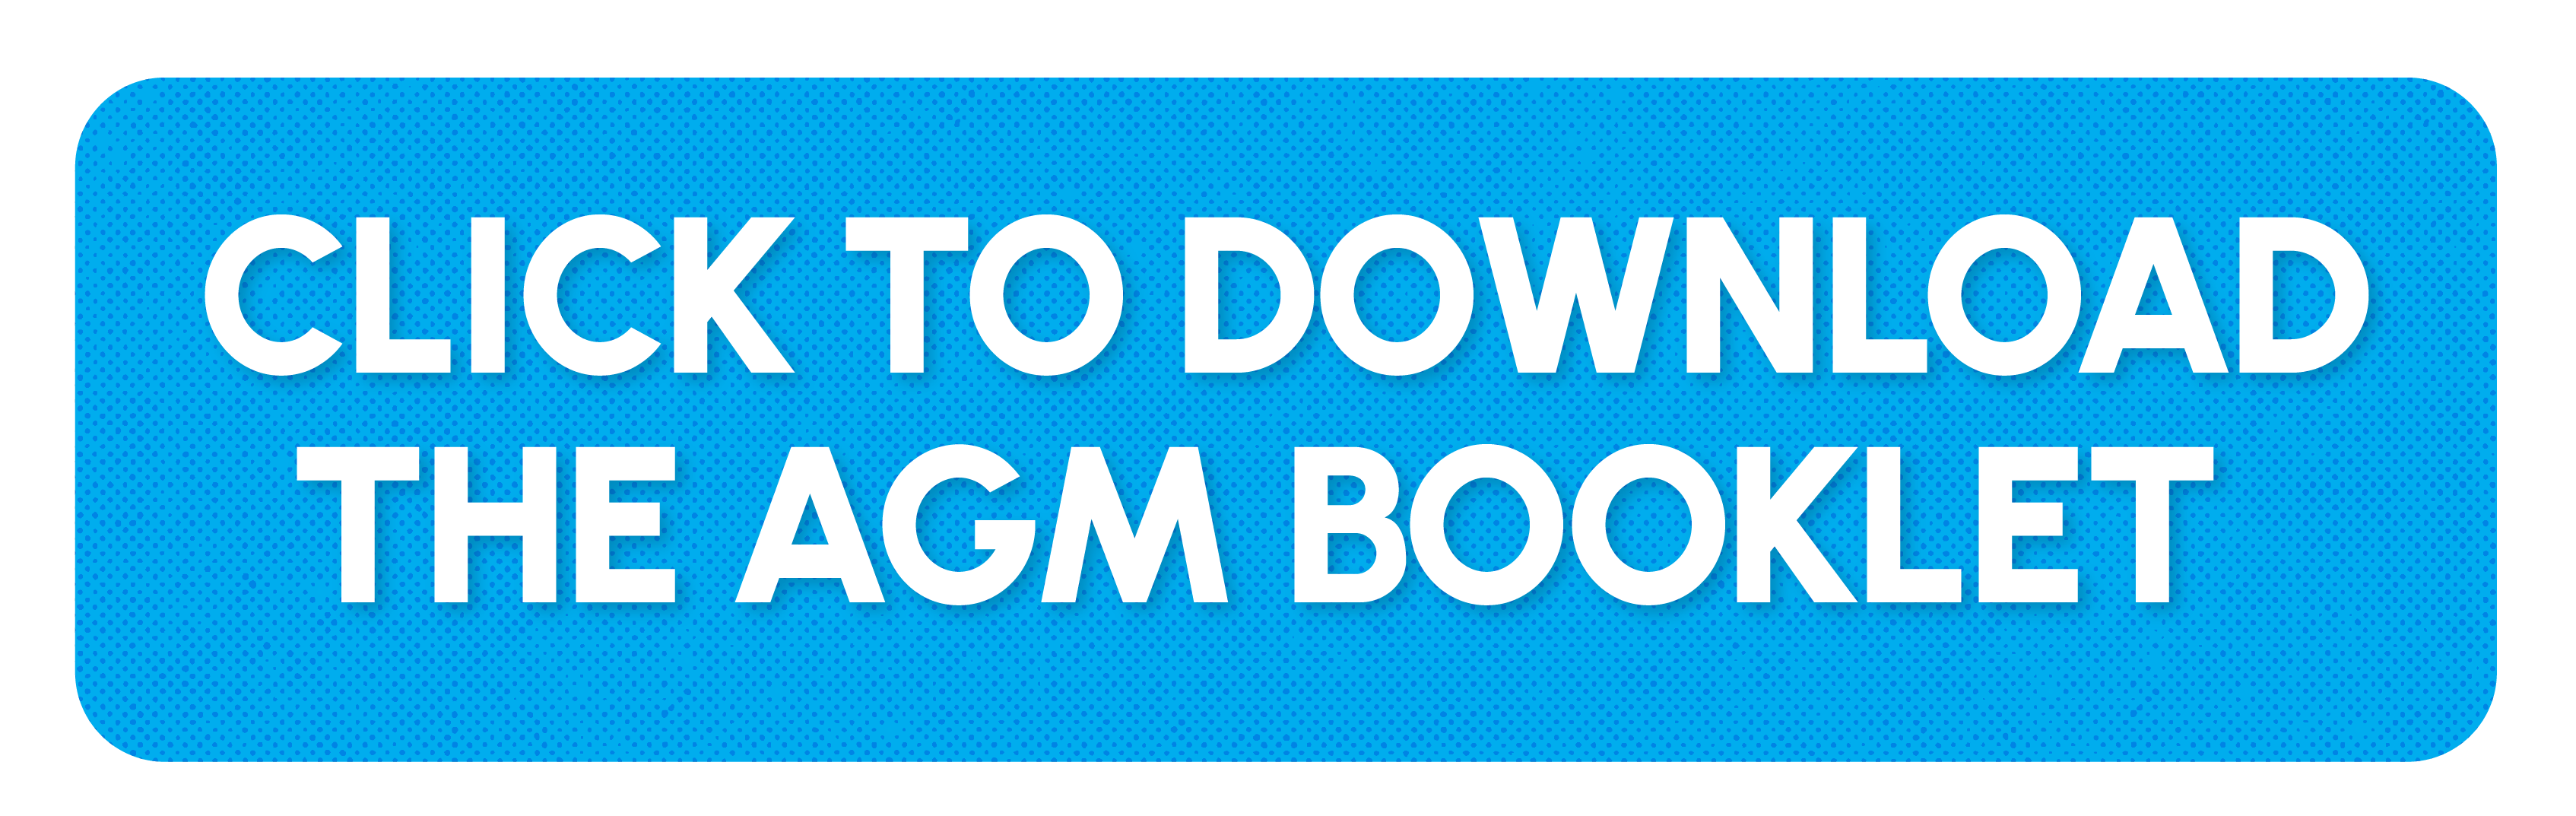 Click here to download the AGM Booklet